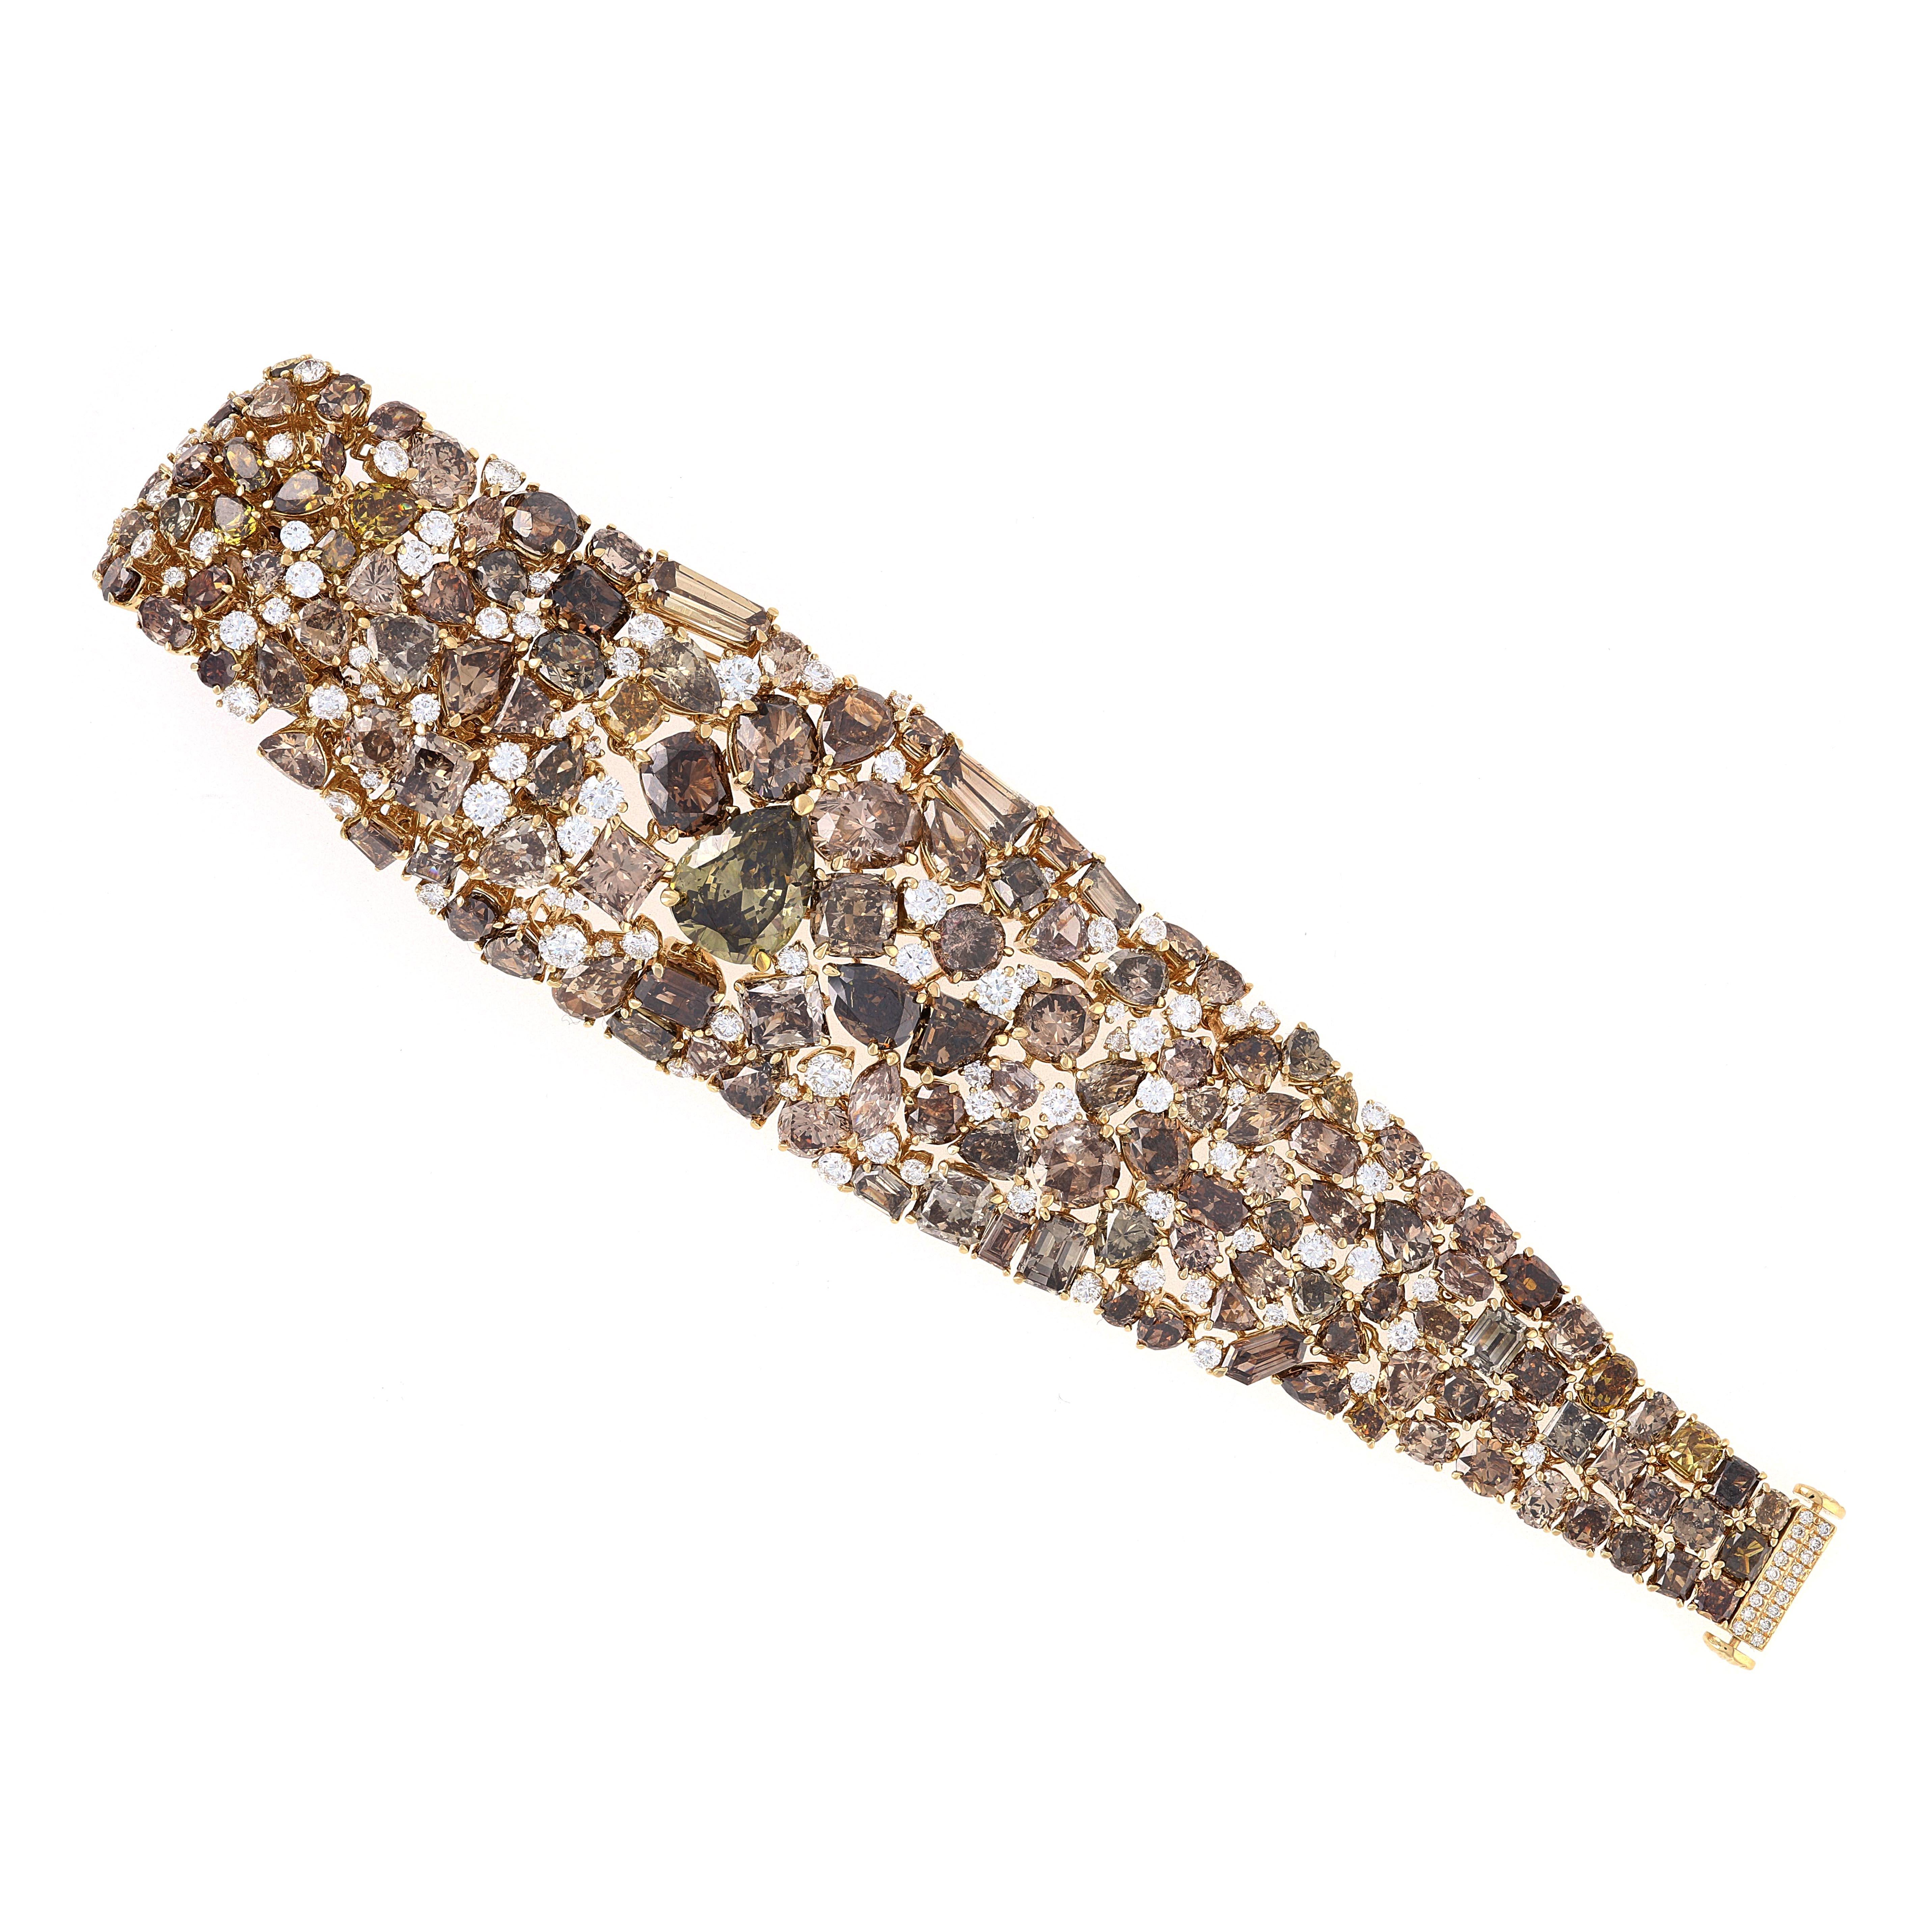 Talk about a big look! This bracelet has over 81 carats of brown and yellow diamonds set beautifully in 18kt yellow gold. The center pear shape is about 5 carats just by itself. This bracelet is made so well that it can actually be rolled. We have